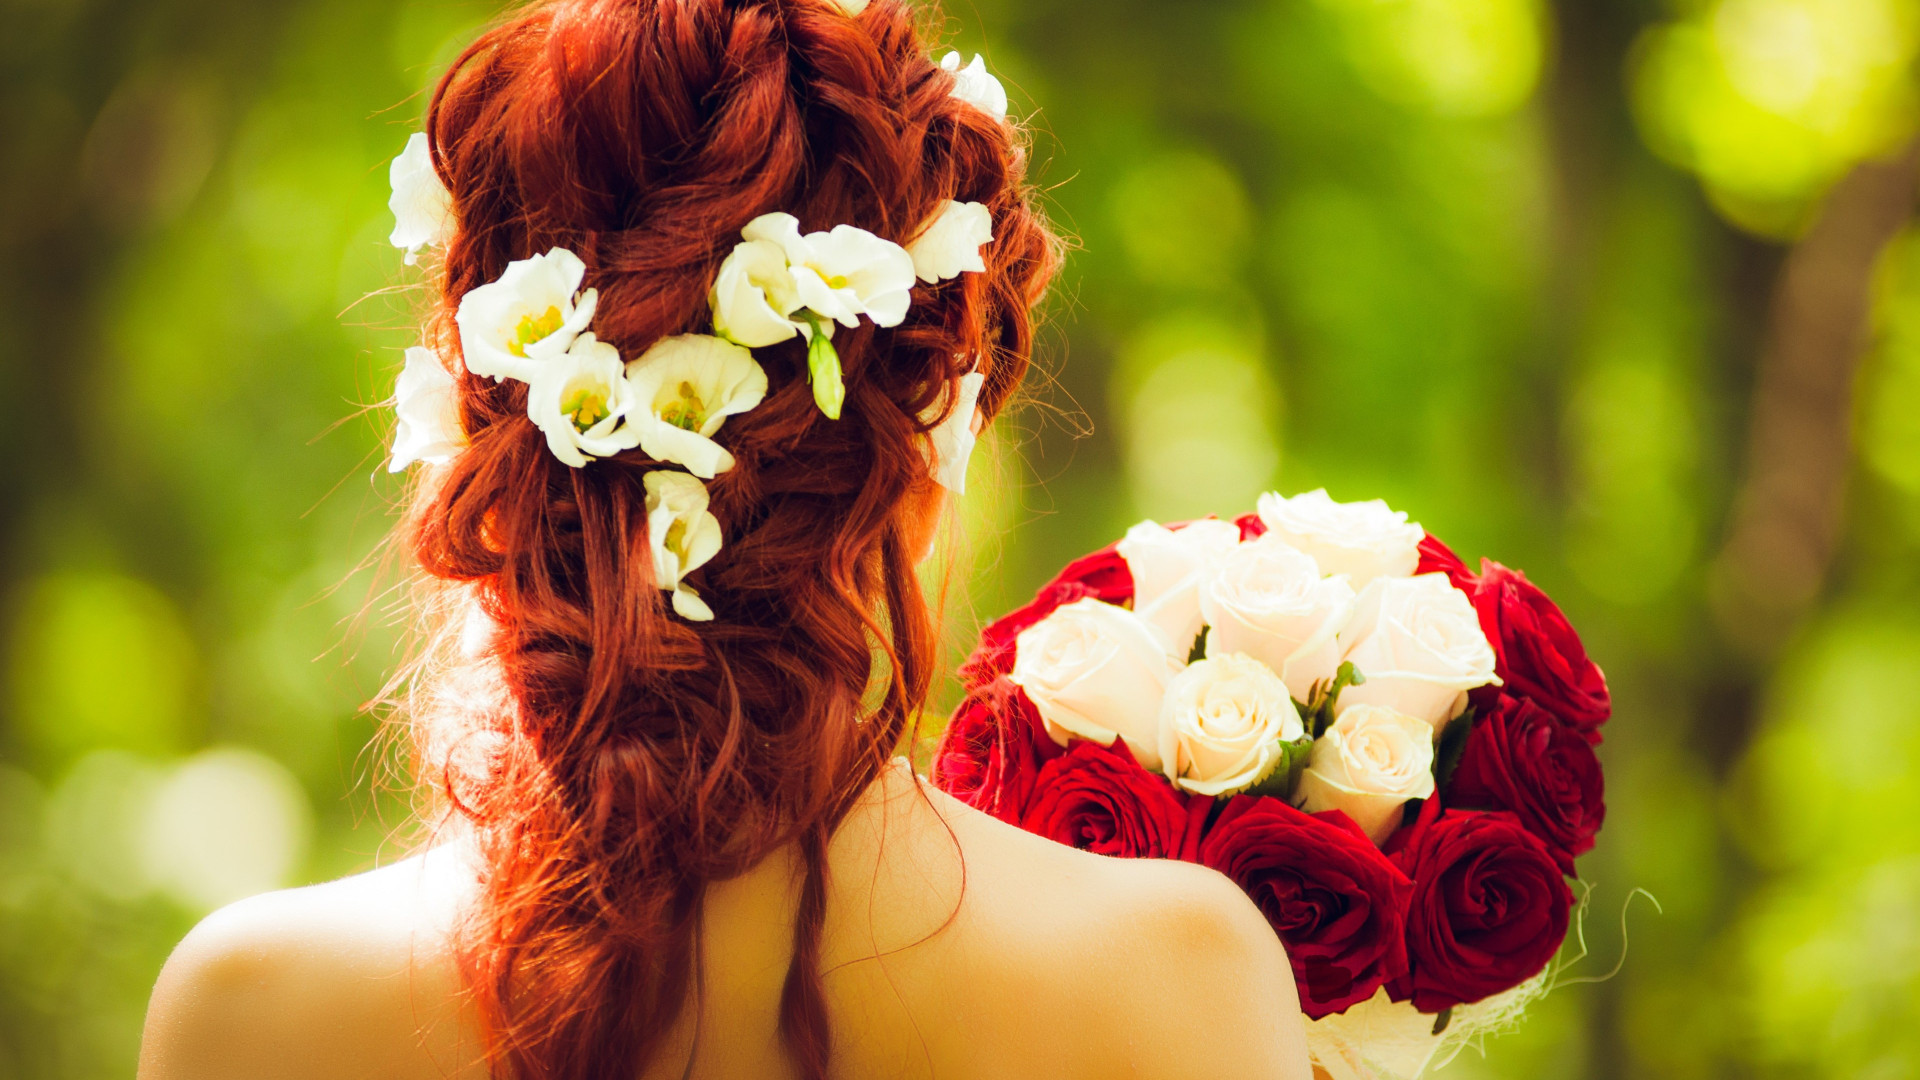 Bride and wedding flowers wallpaper 1920x1080